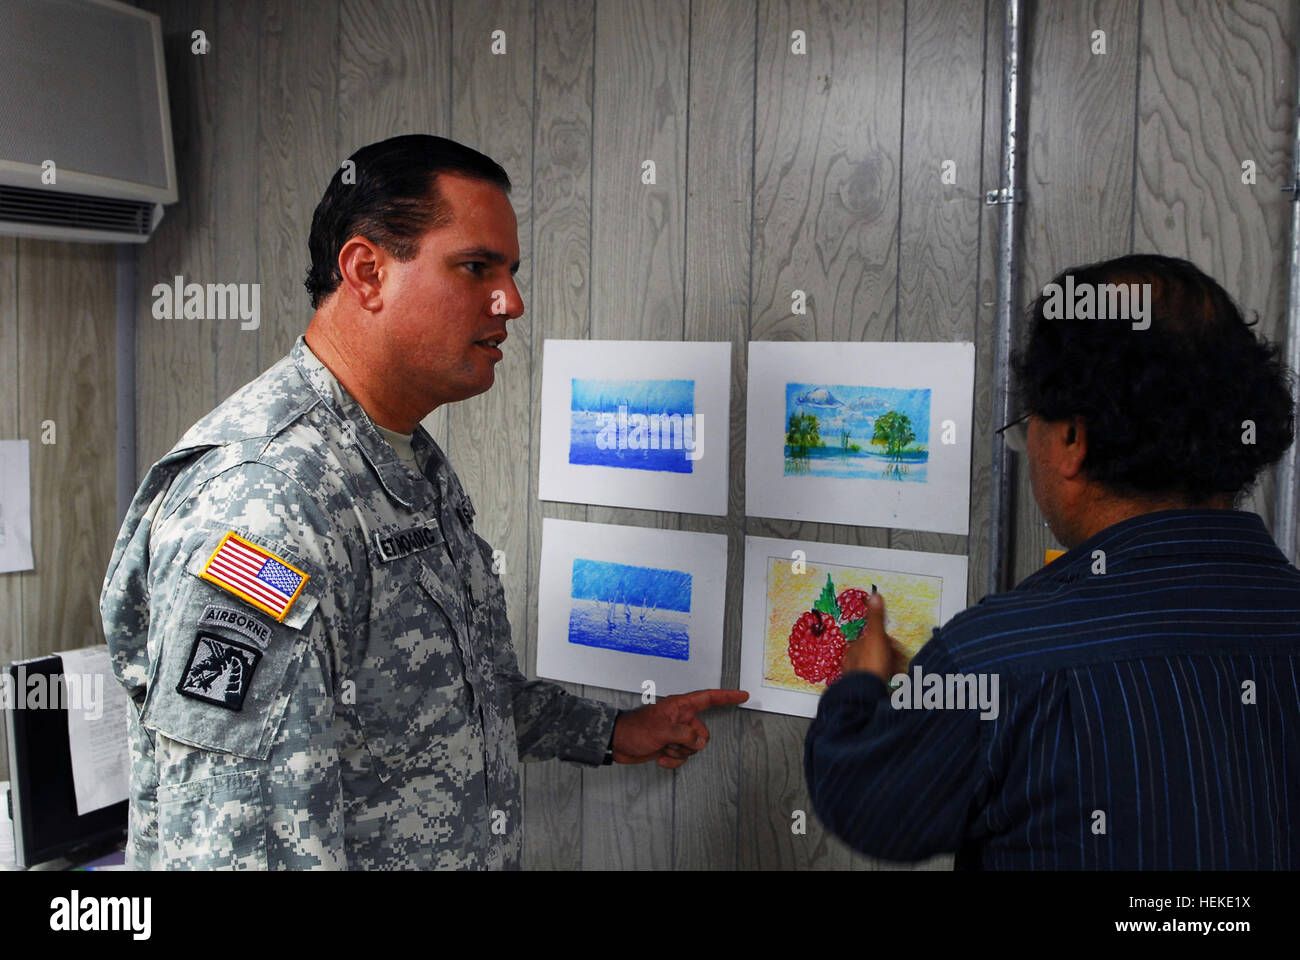 GUANTANAMO BAY, Cuba – Army Capt. Jose Izquierdo, Joint Task Force Guantanamo’s officer-in-charge of detainee programs, receives an update from Adam, the art instructor, on the art work produced by the detainees, Aug. 4, 2009. The art program provides intellectual stimulation for the detainees, and allows them to express their creativity. JTF Guantanamo conducts safe, humane, legal and transparent care and custody of detainees, including those convicted by military commission and those ordered released by a court. The JTF conducts intelligence collection, analysis and dissemination for the pro Stock Photo